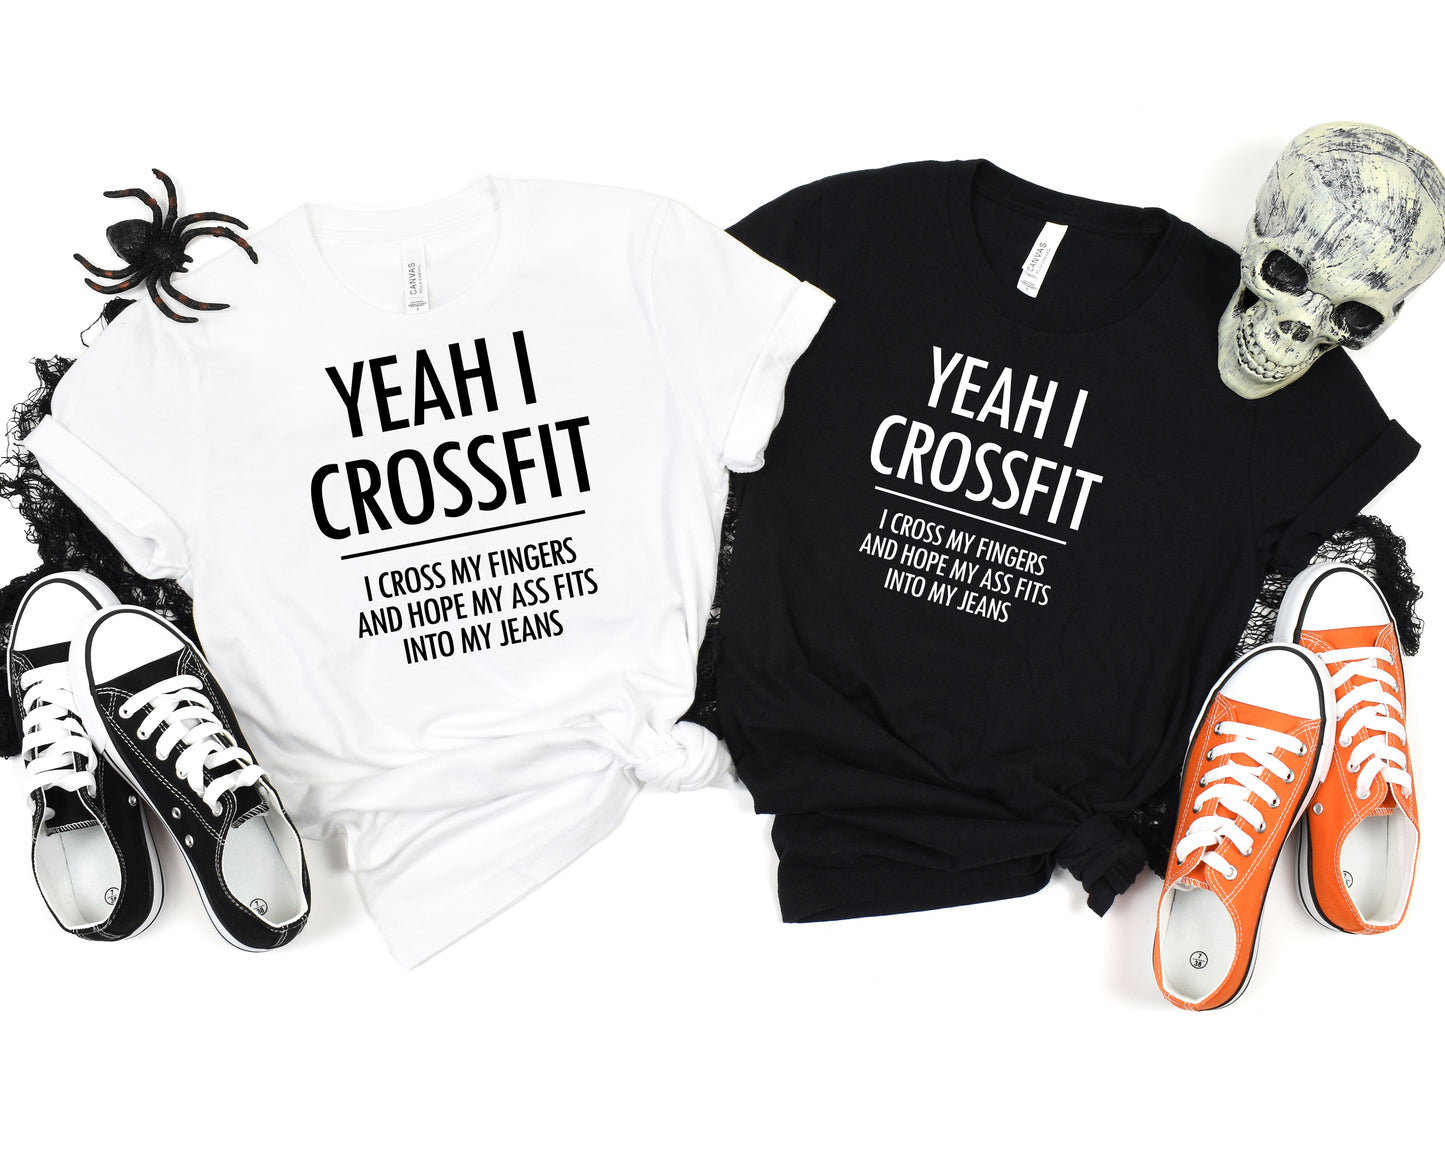 Funny Crossfit Shirt, Funny Workout Shirt, Crossfit Tee, Bodybuilding Shirt, Gym Shirt, Yeah I crossfit Tee, Fitness Shirt, Barbell Tee